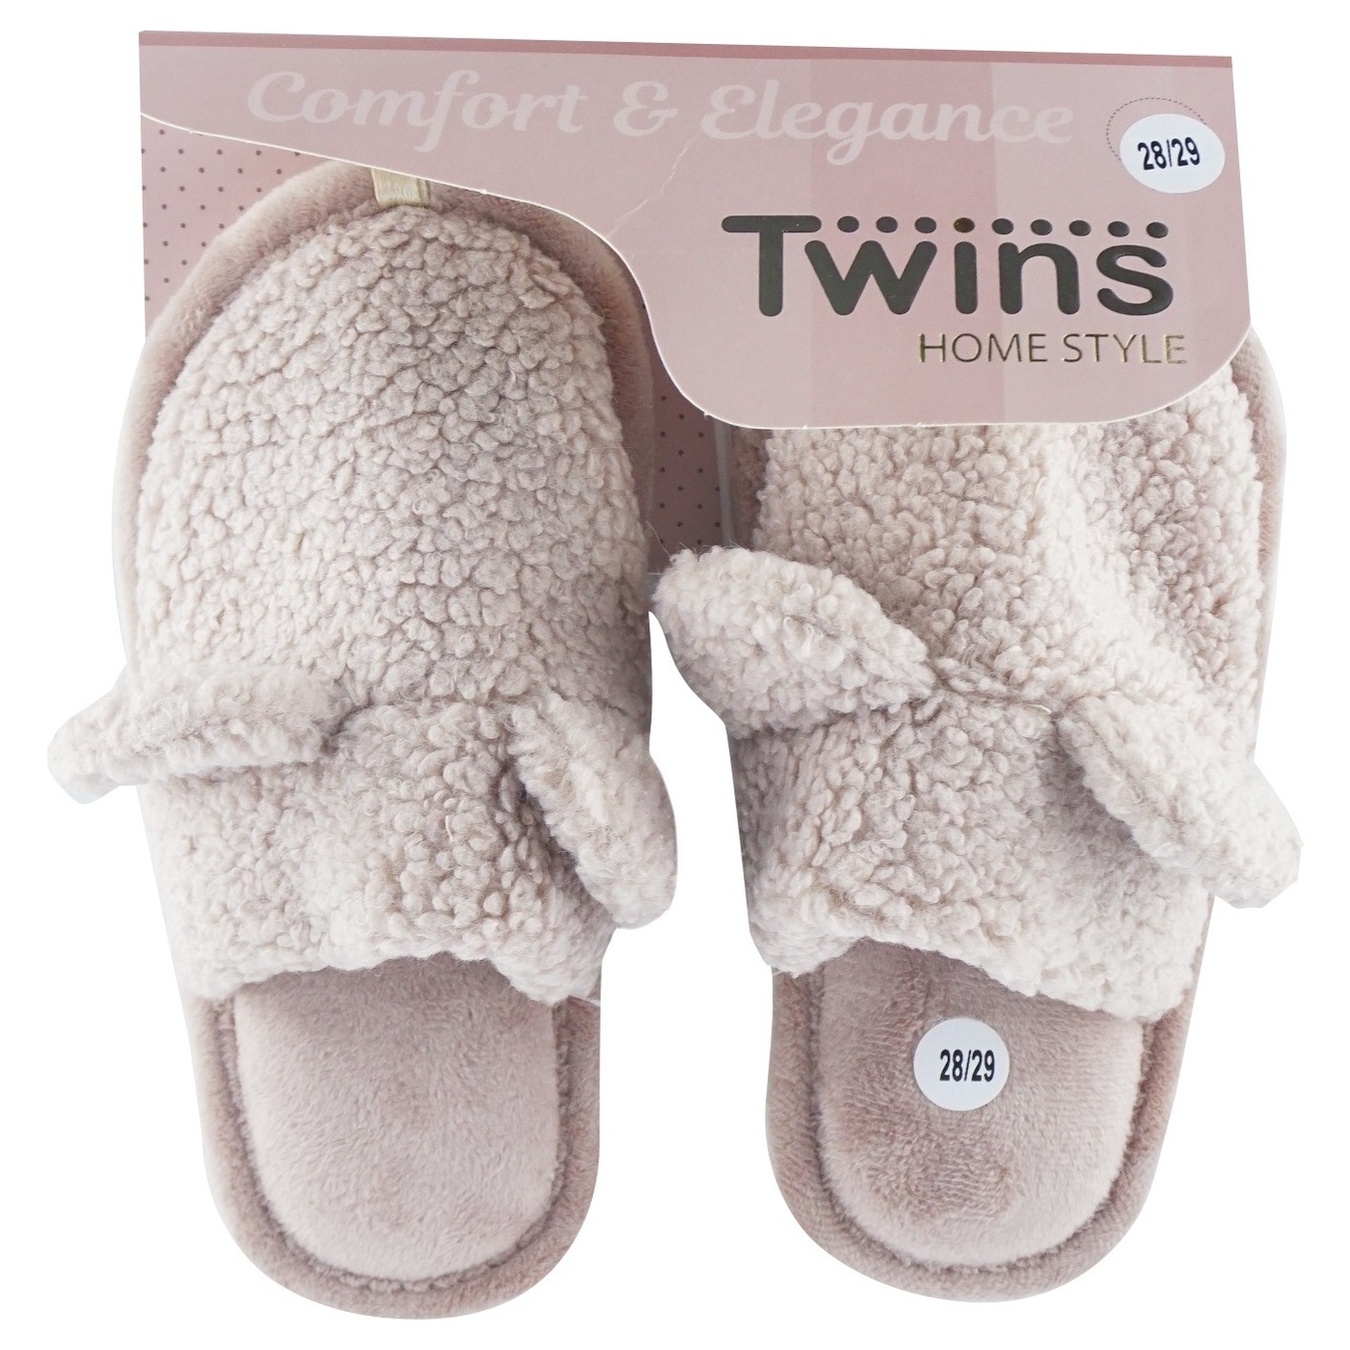 Home slippers for children Twins HS TEDDI fur size 28-35 2